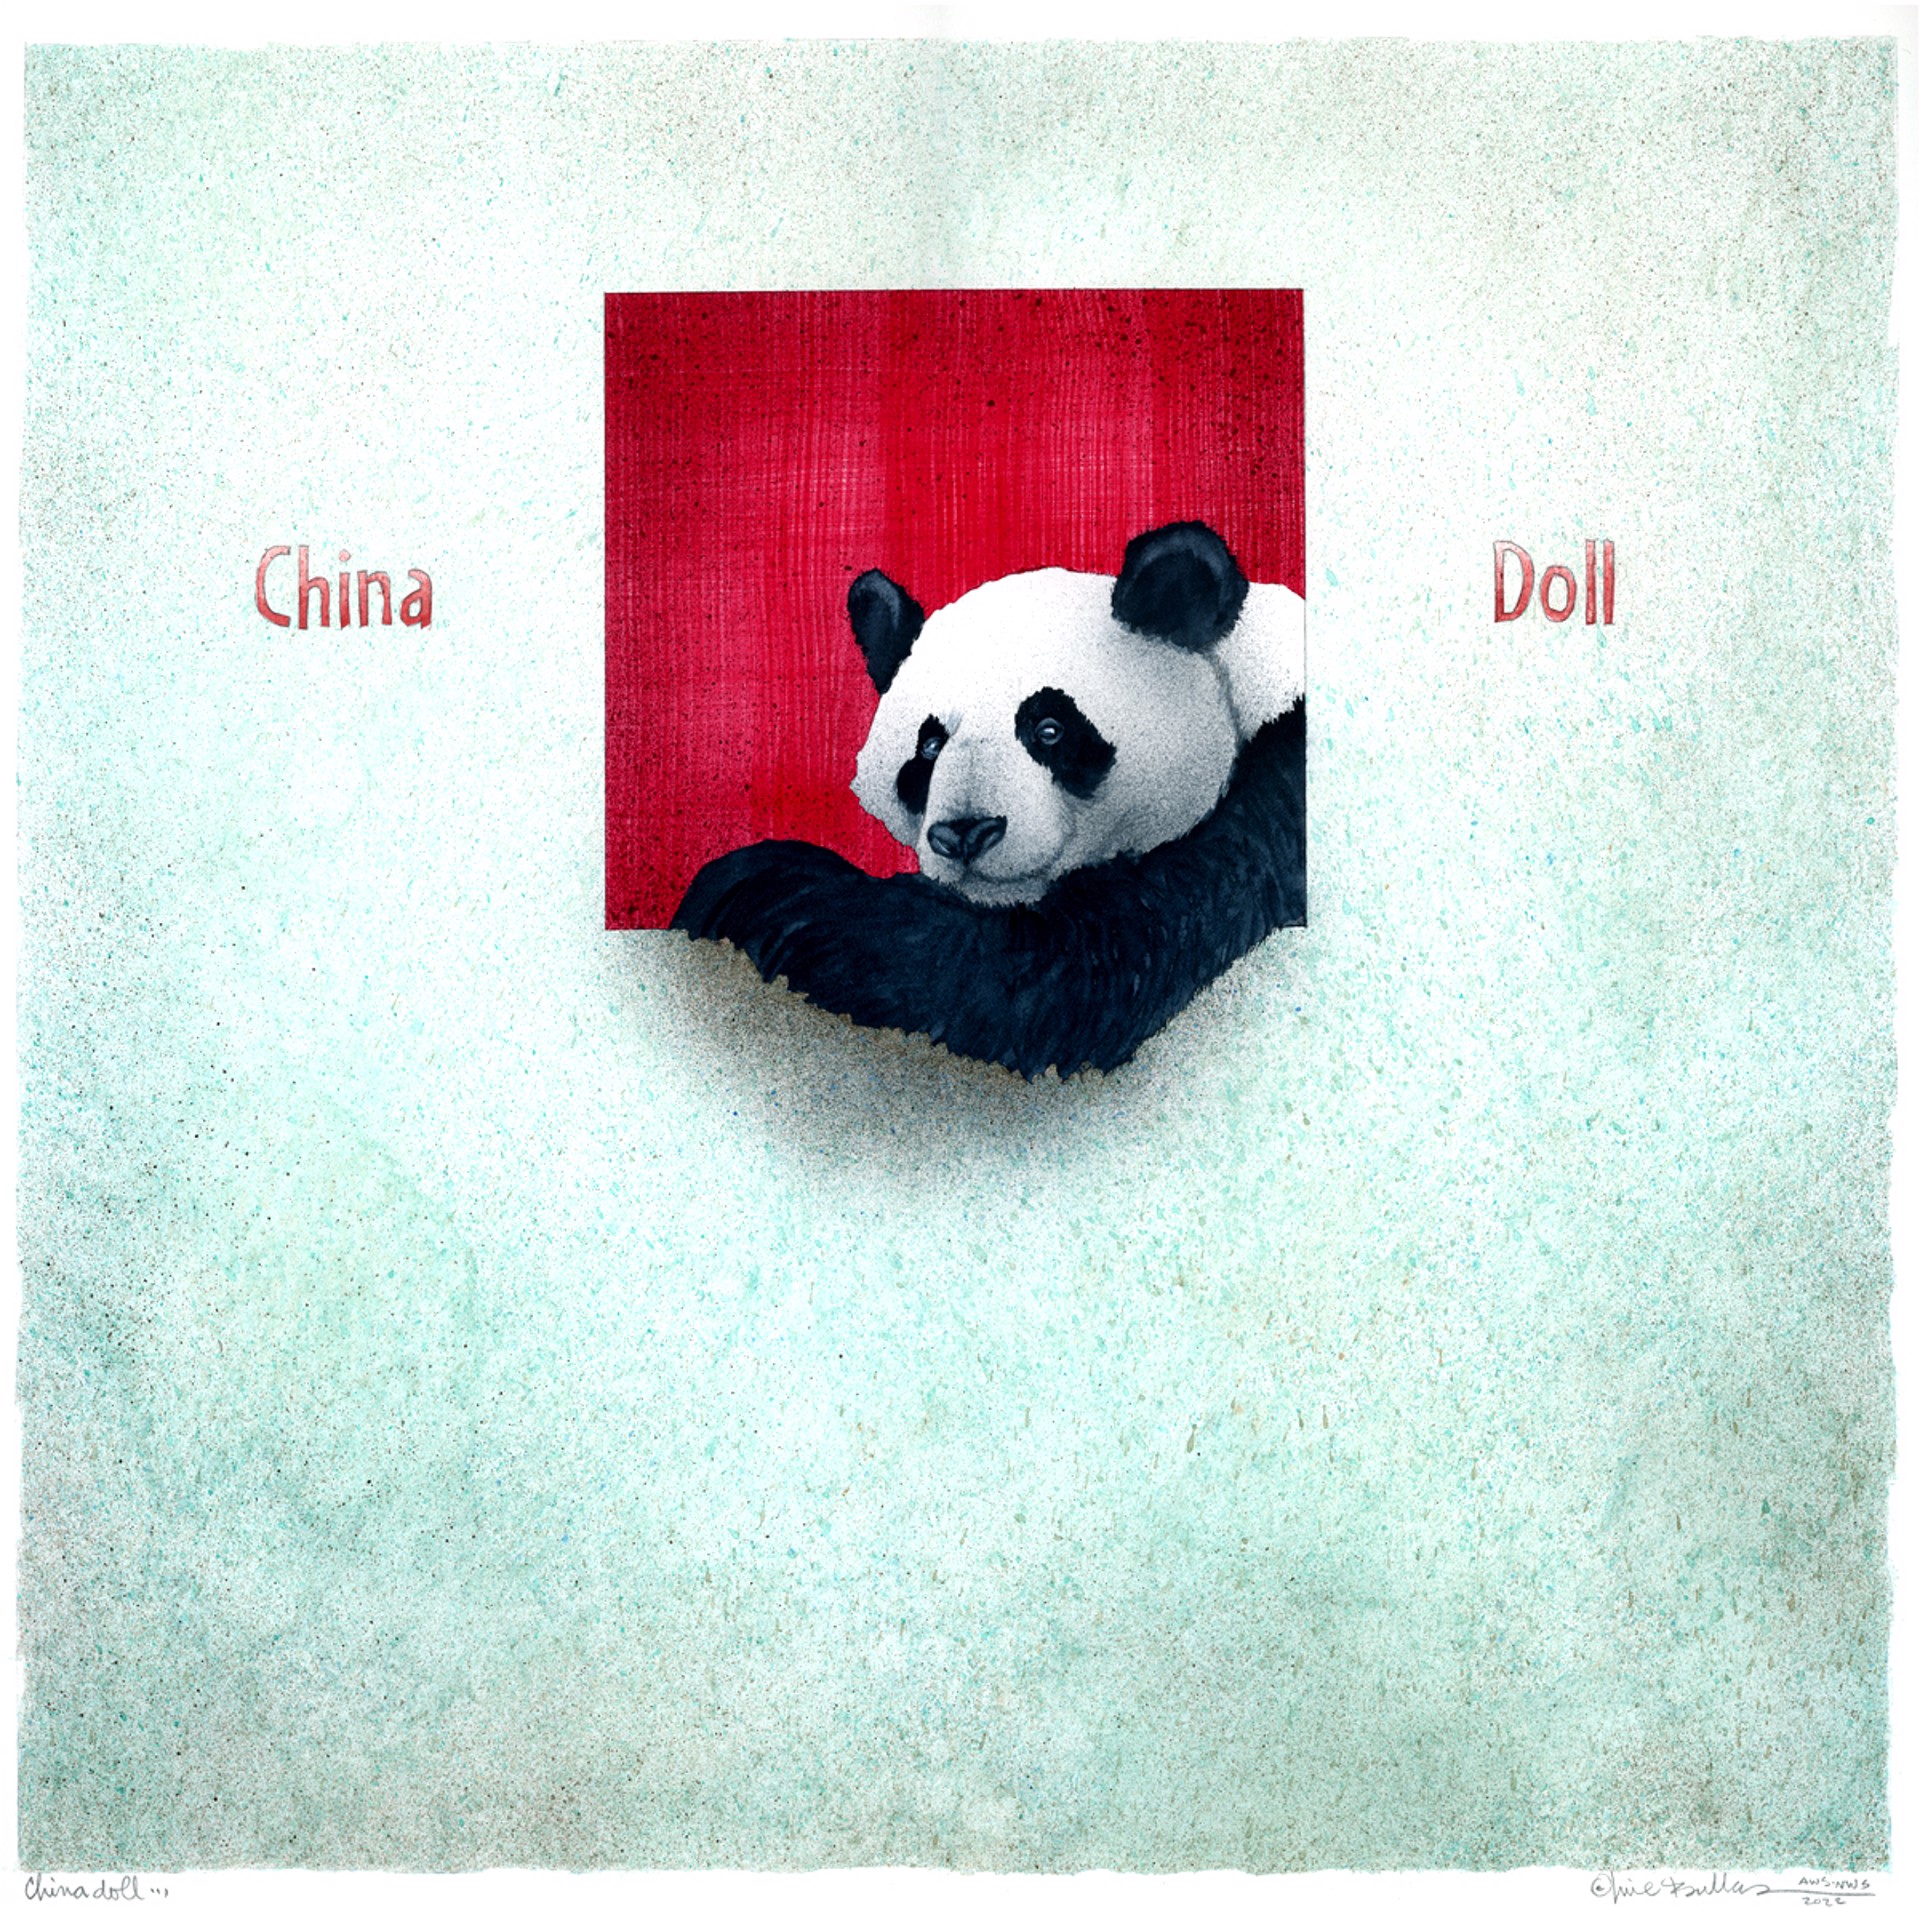 China doll by Will Bullas